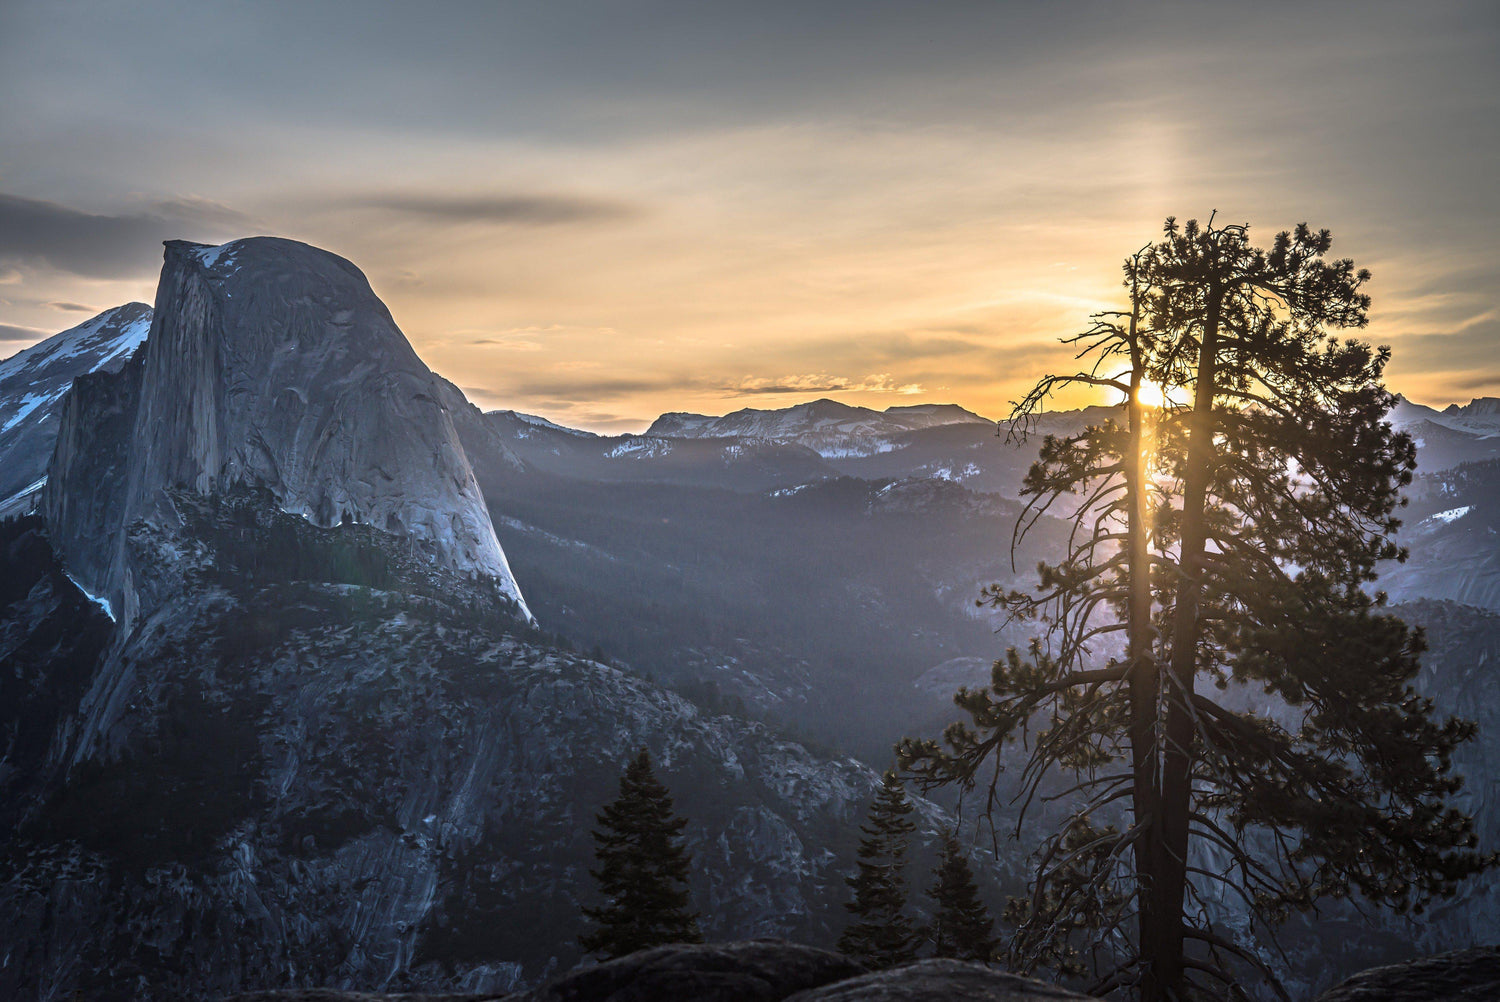 Fine photographic and art print of sunrise at Glacier Point in Yosemite National Park in California with Half Dome in the near distance and a tree in the foreground.